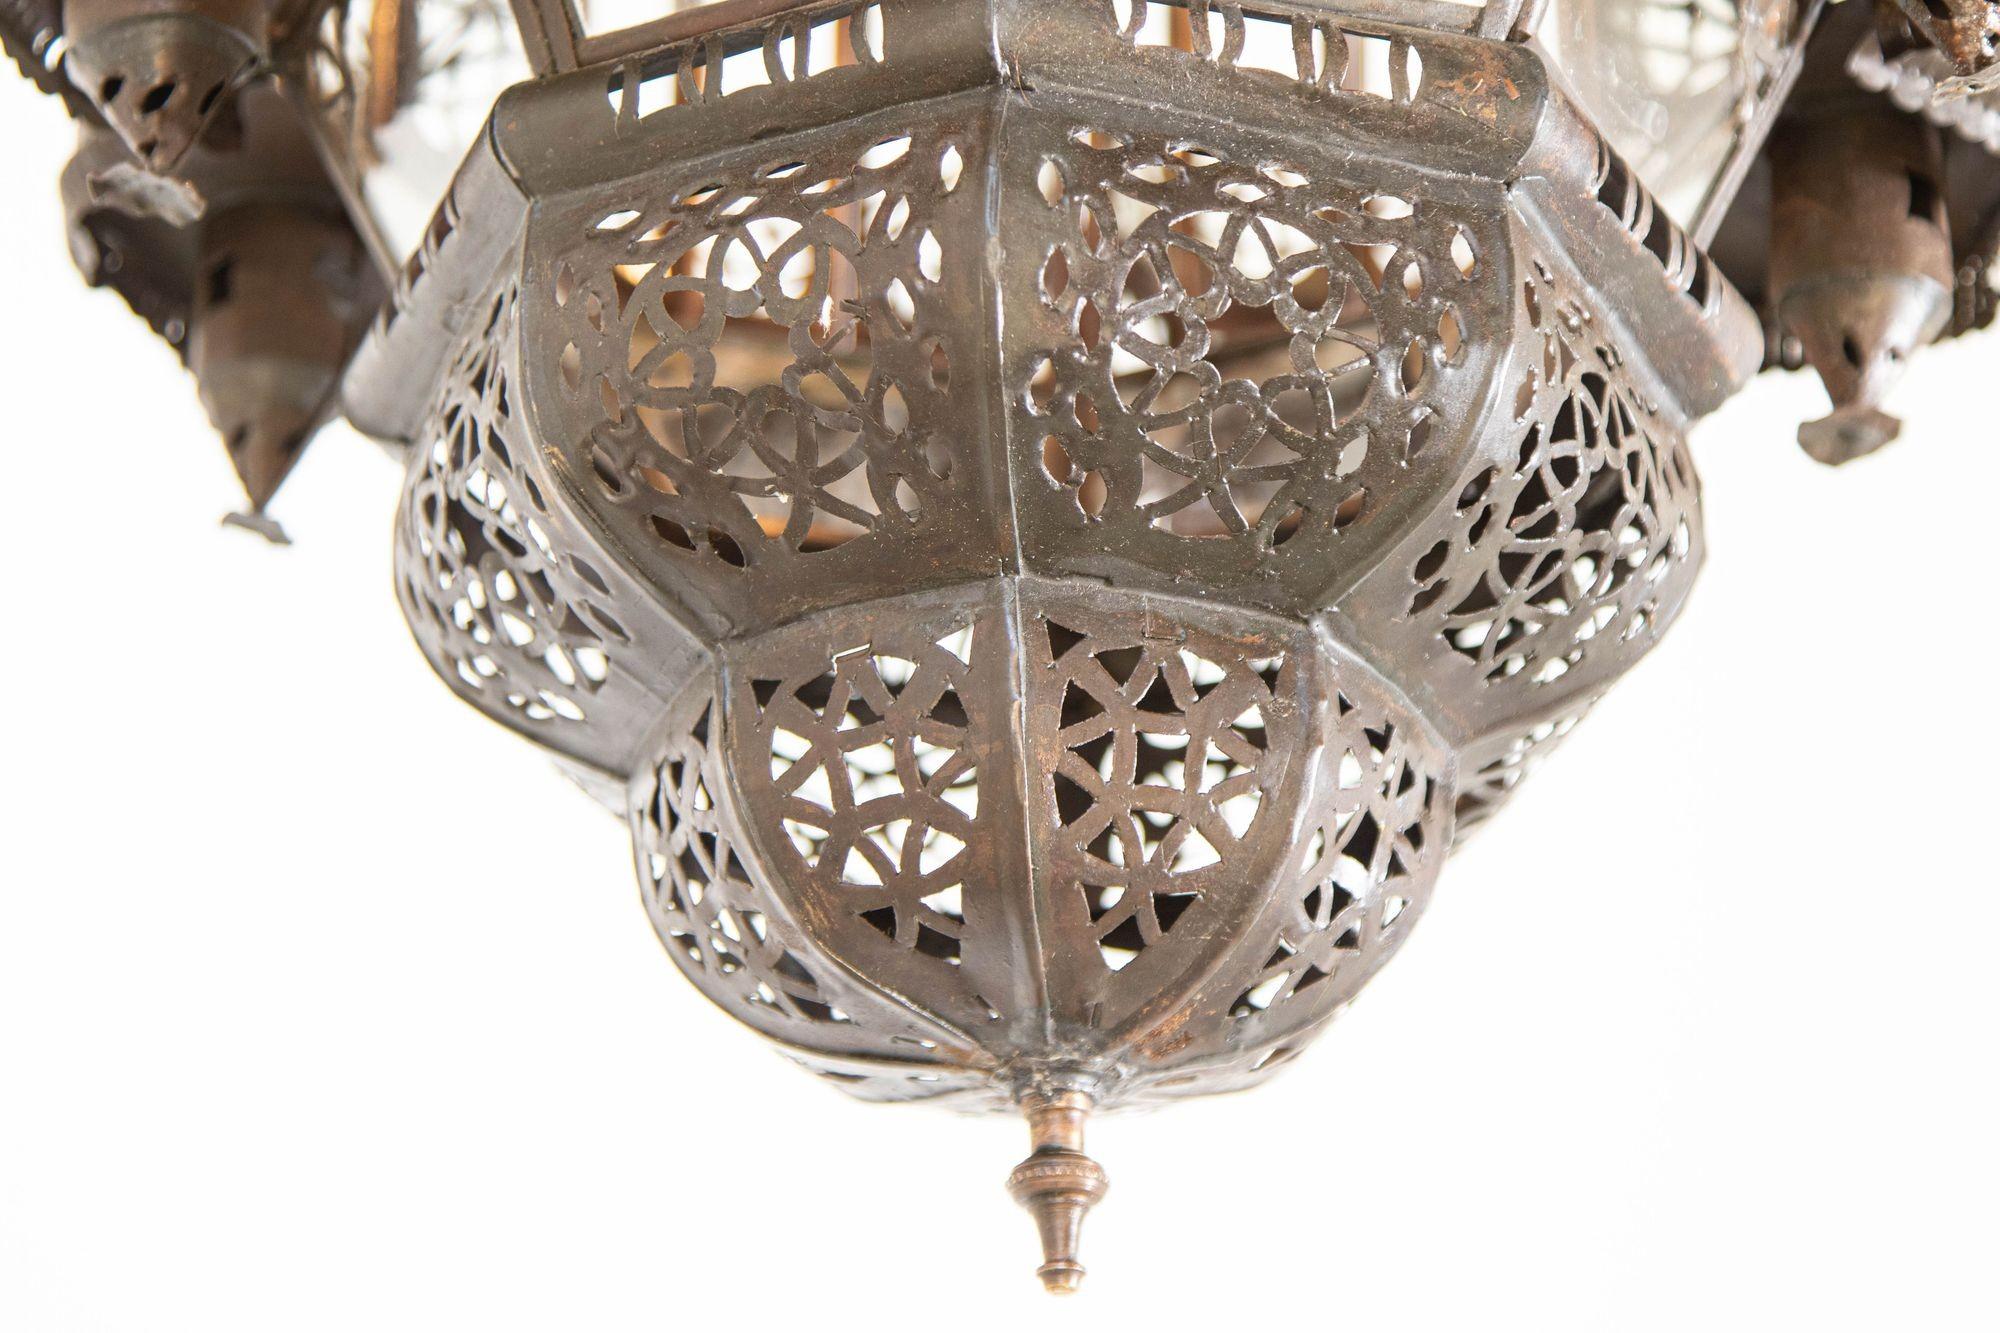 Vintage Moroccan Lantern Mamounia Clear Glass Hand-Crafted Ceiling Light Fixture For Sale 3